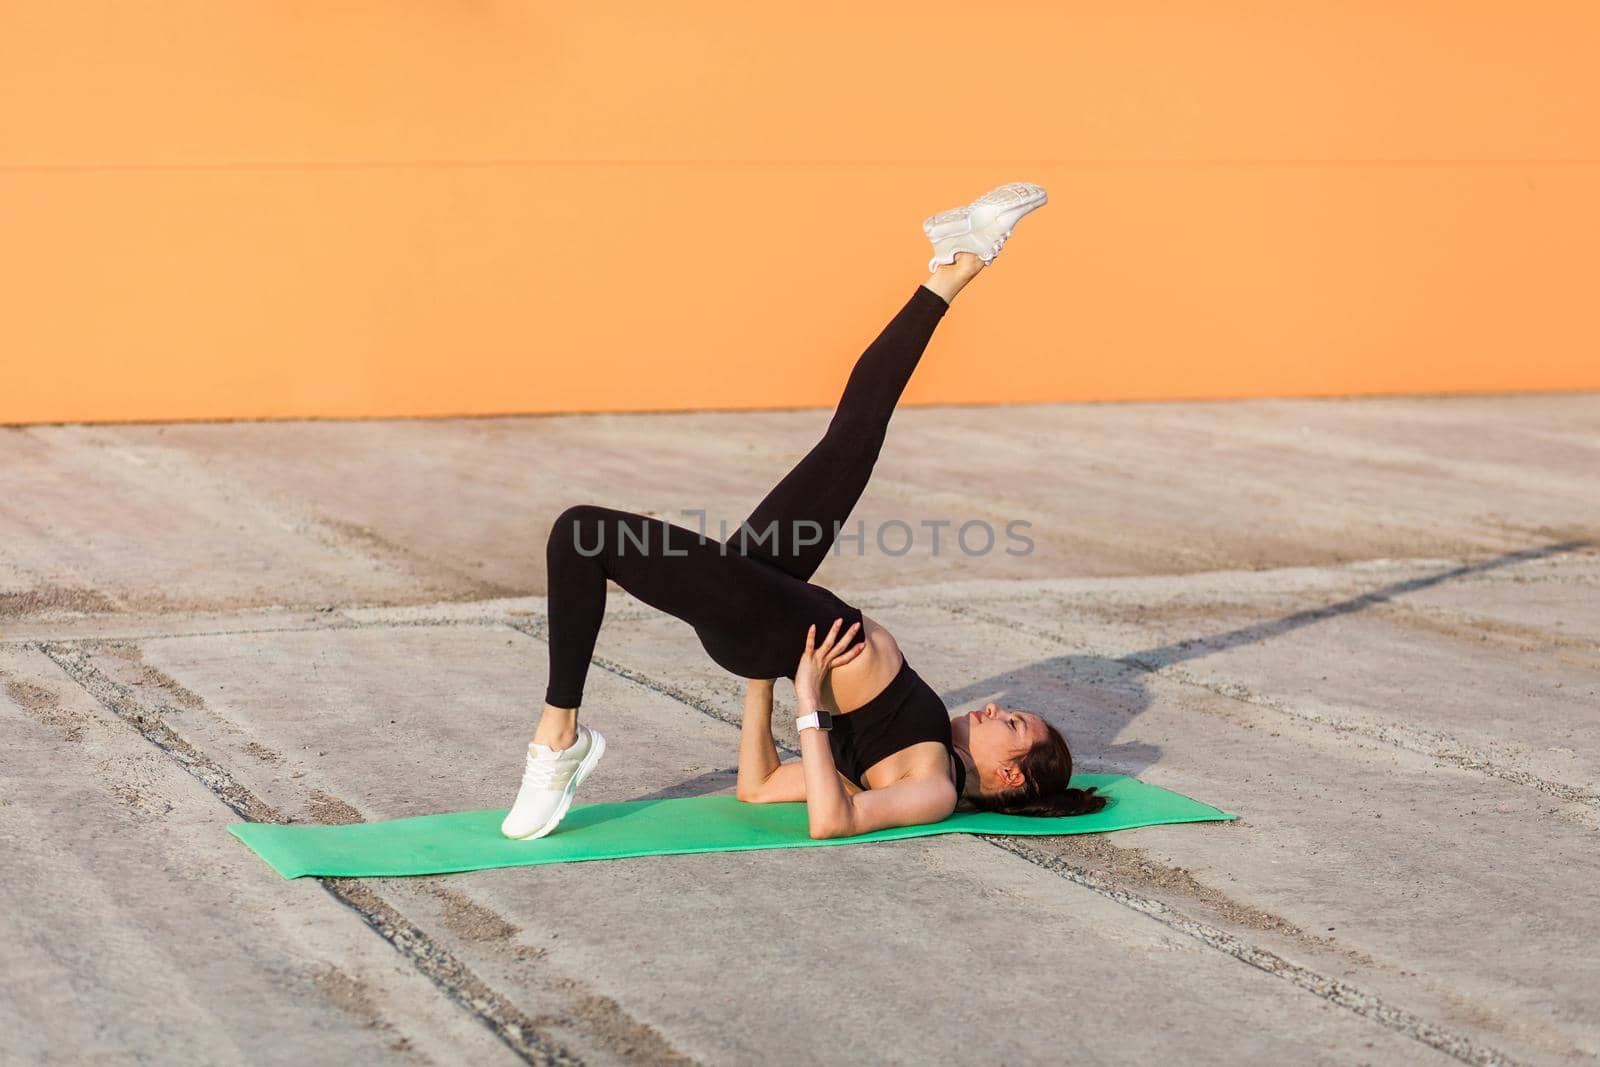 Slim athletic girl in tight sportswear, black pants and top, practicing yoga, doing one legged bridge pose with leg raise, training muscles and flexibility. Health care, sport activity outdoor